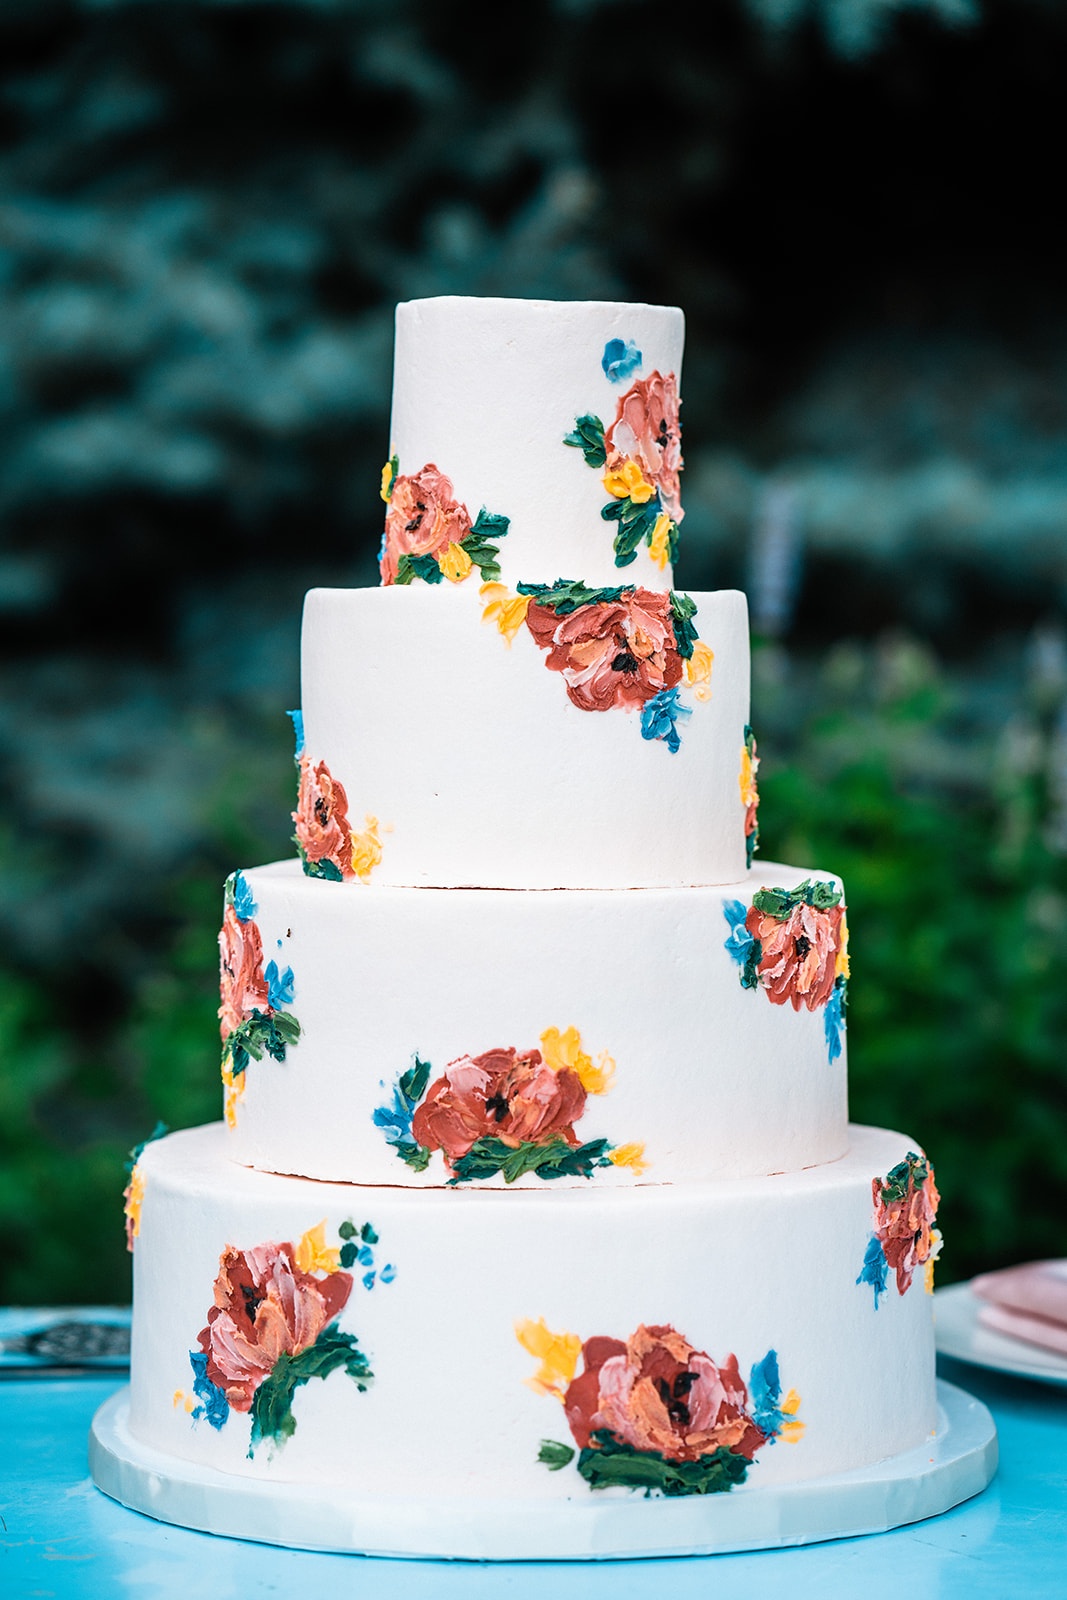 A white wedding cake adorned with flowers was elegantly displayed at the Telluride elopement.